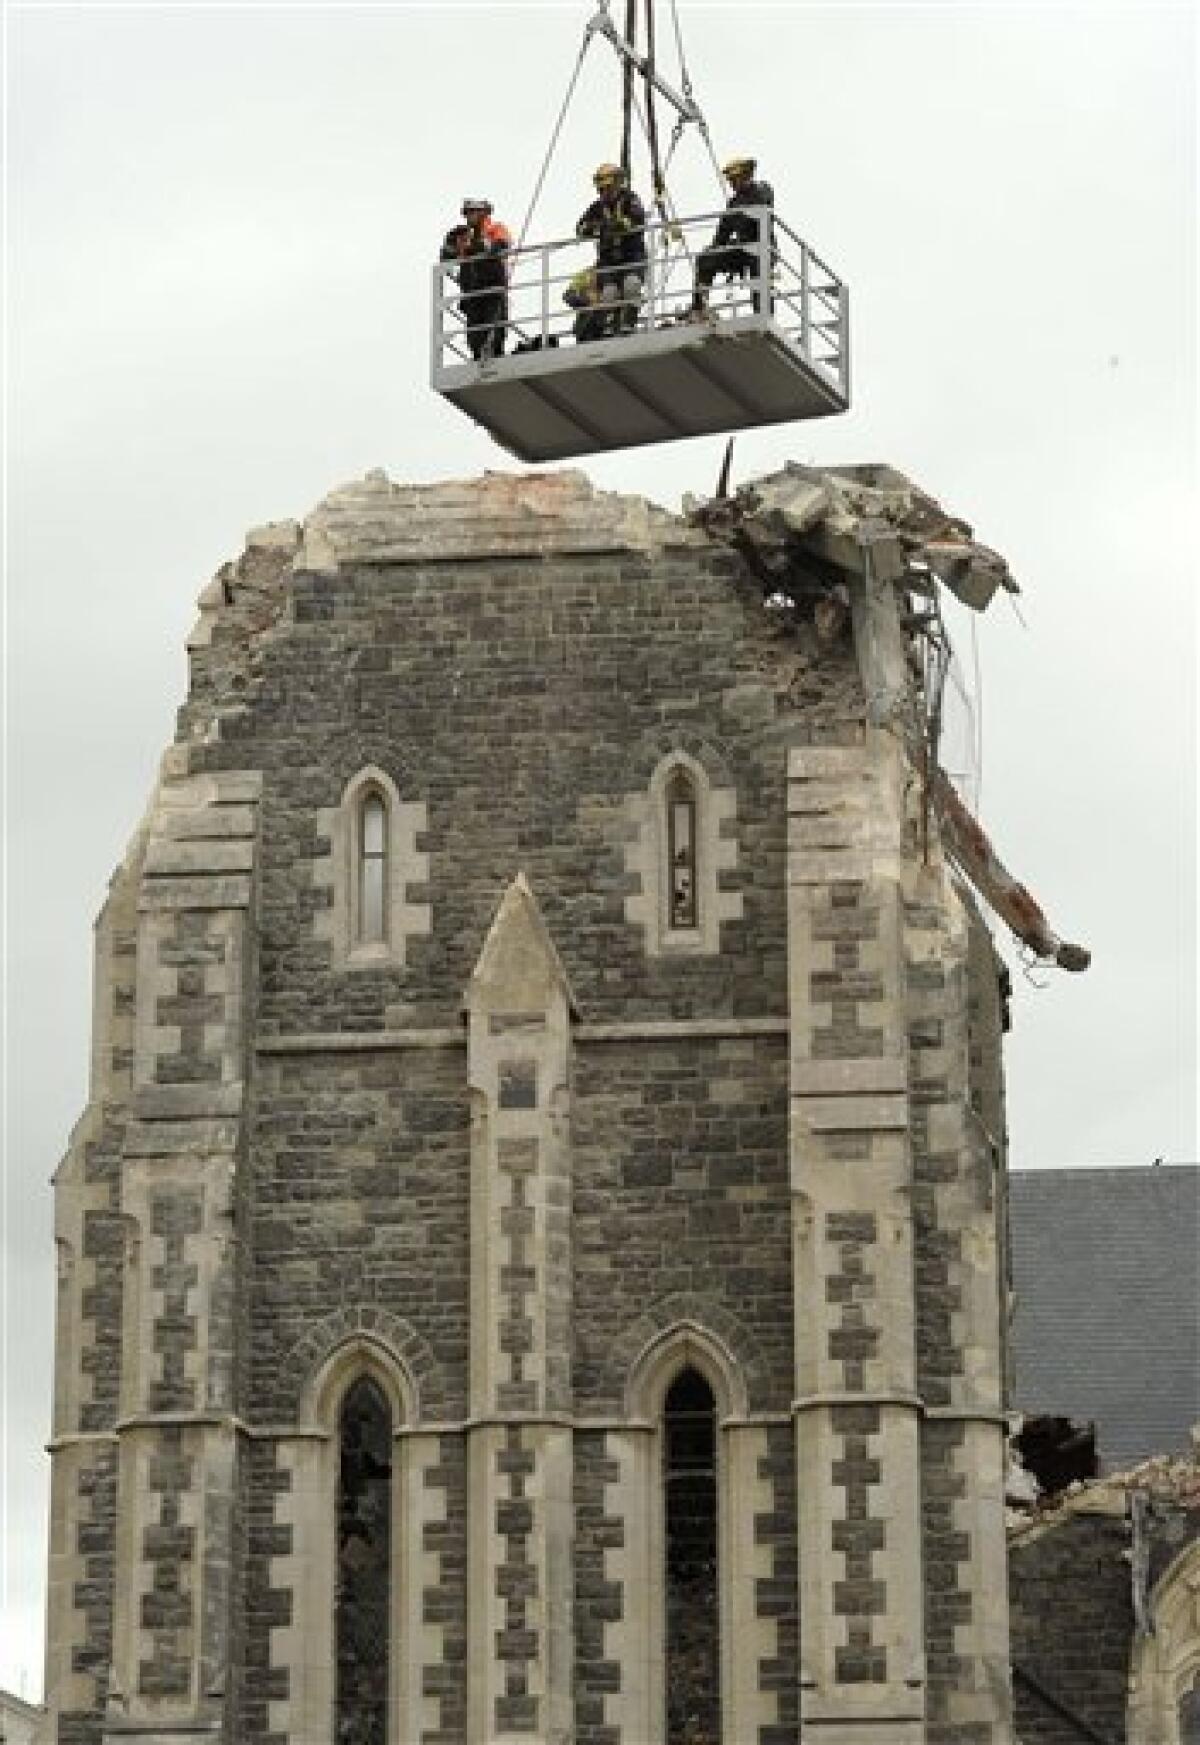 Recovery operation workers are lowered by crane onto the top of the Christchurch Cathedral in Christchurch, New Zealand, Friday, Feb. 25, 2011. A magnitude 6.3 quake struck Christchurch near lunchtime on Tuesday, collapsing buildings and causing massive damage in one of the country's worst natural disasters. (AP Photo/Rob Griffith)